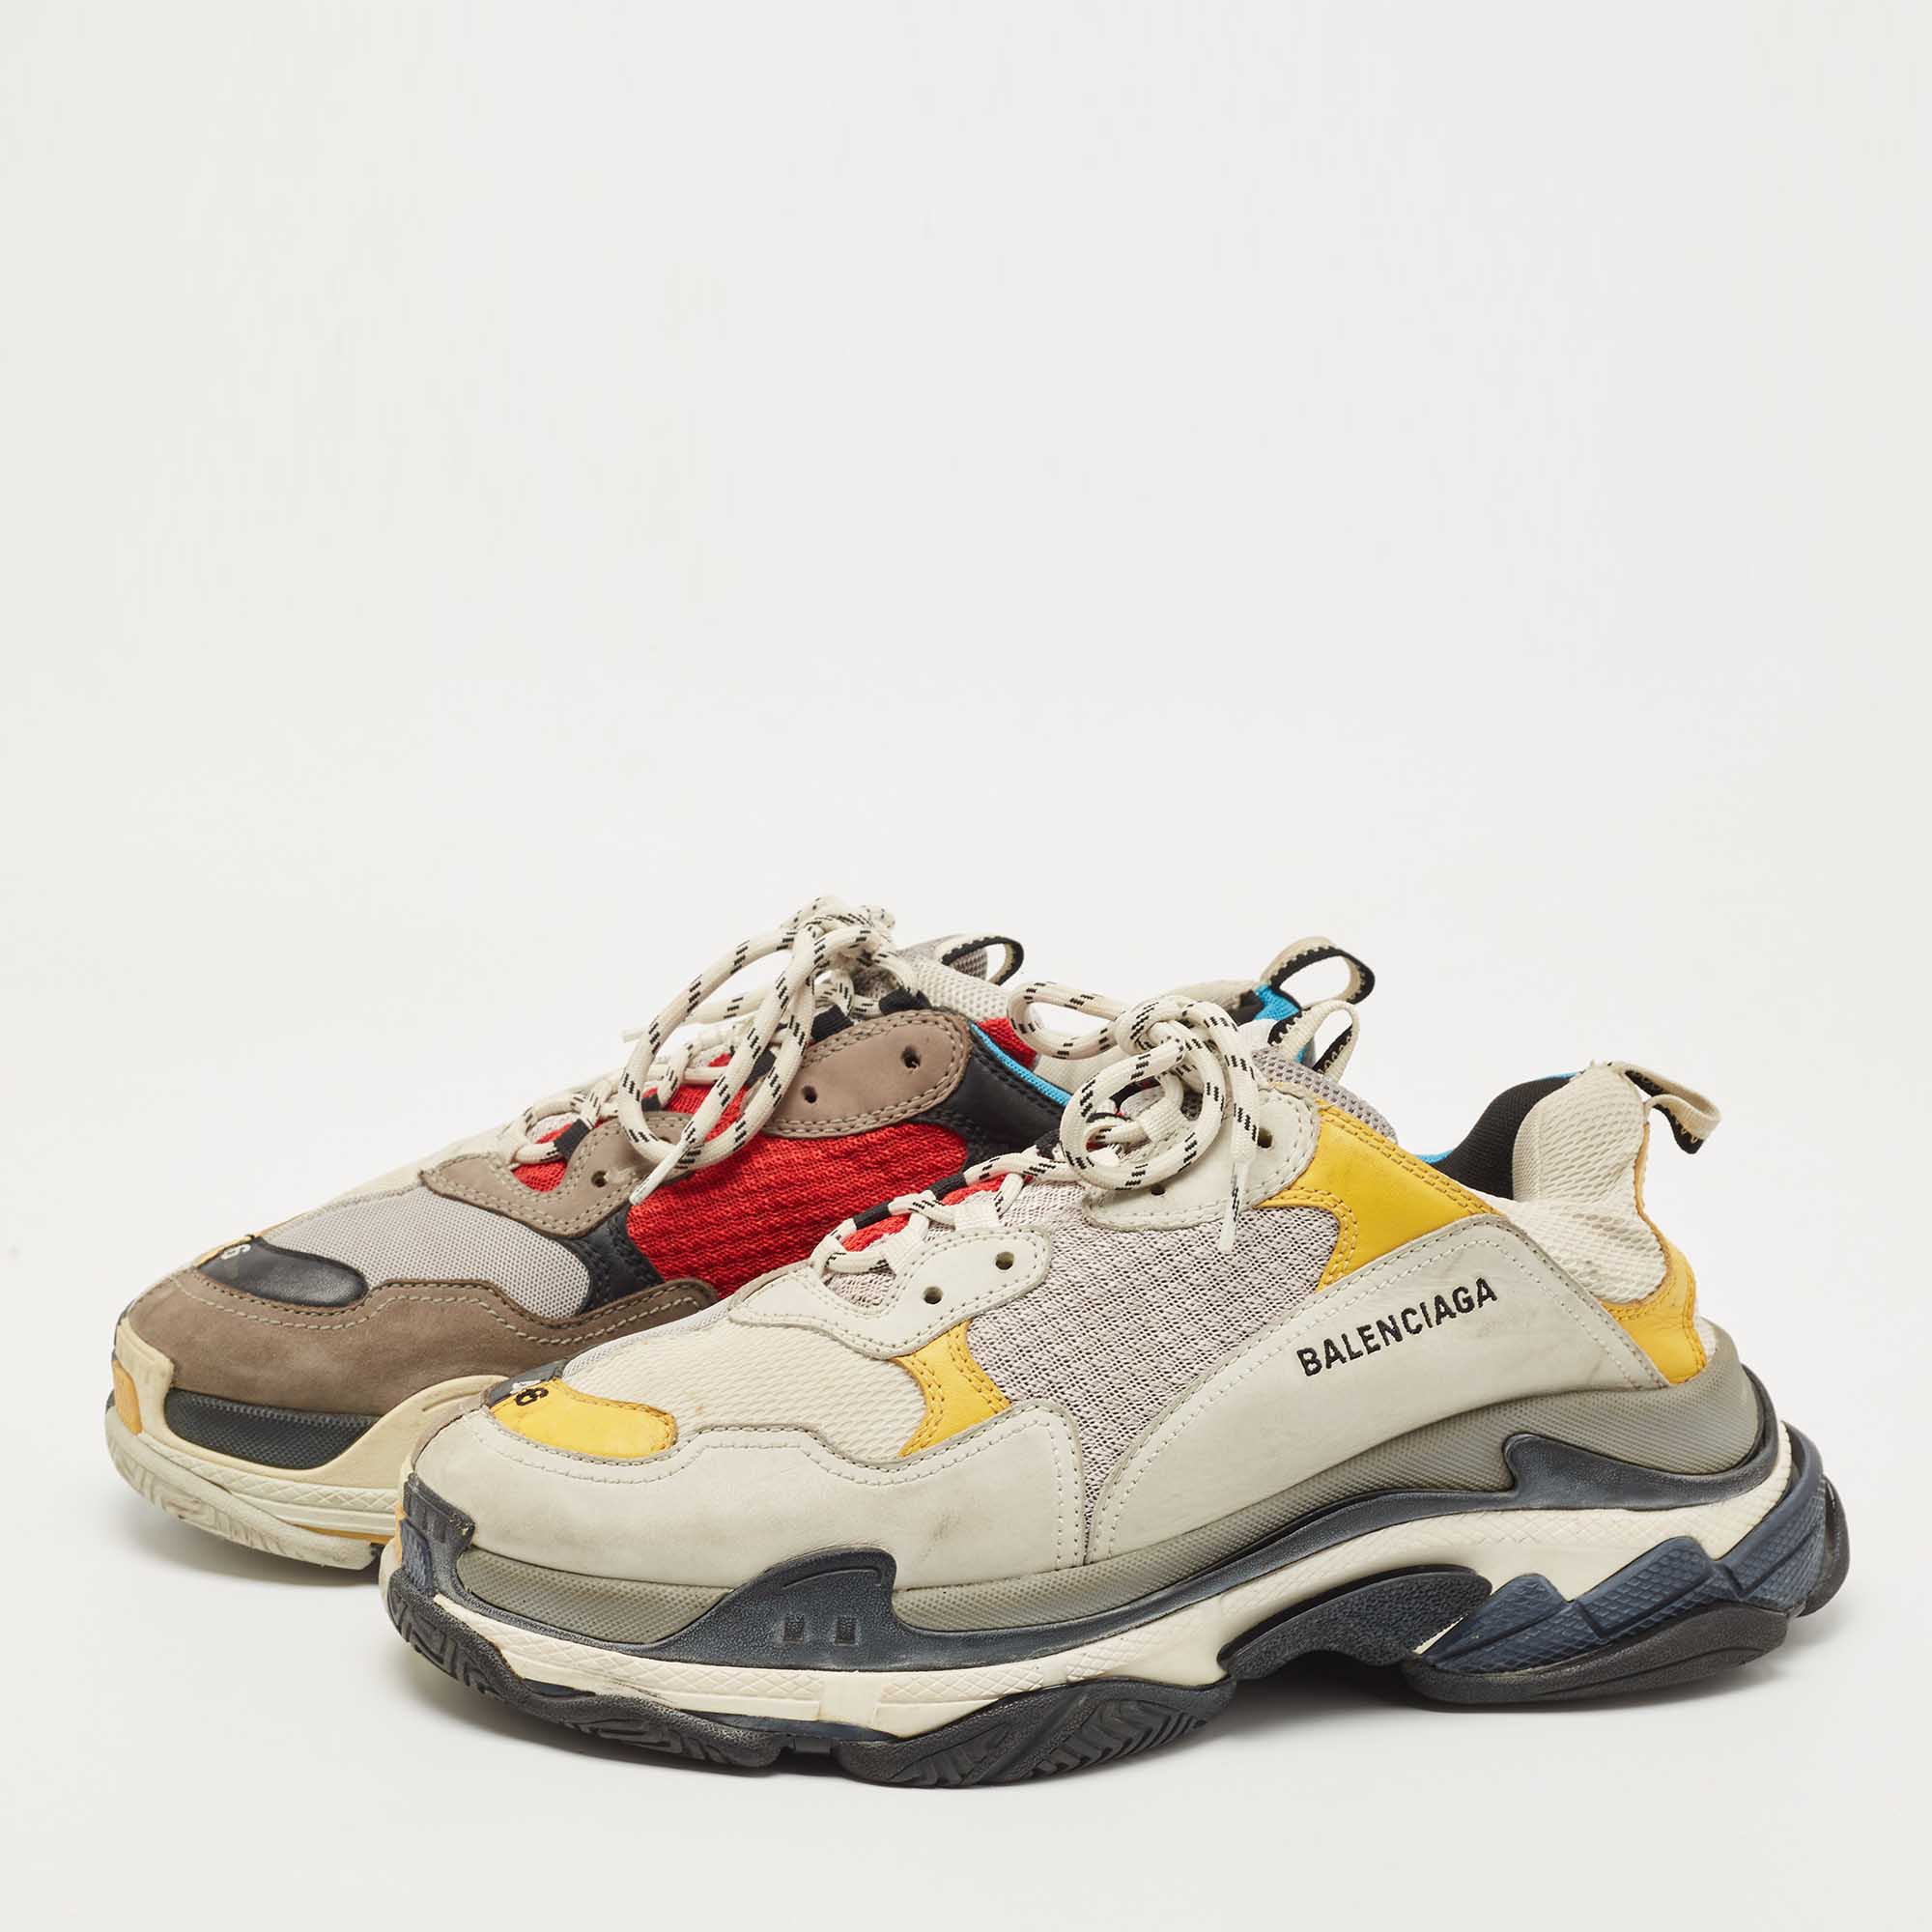 

Balenciaga Multicolor Mesh and Nubuck Leather Triple S Low Top Sneakers Size